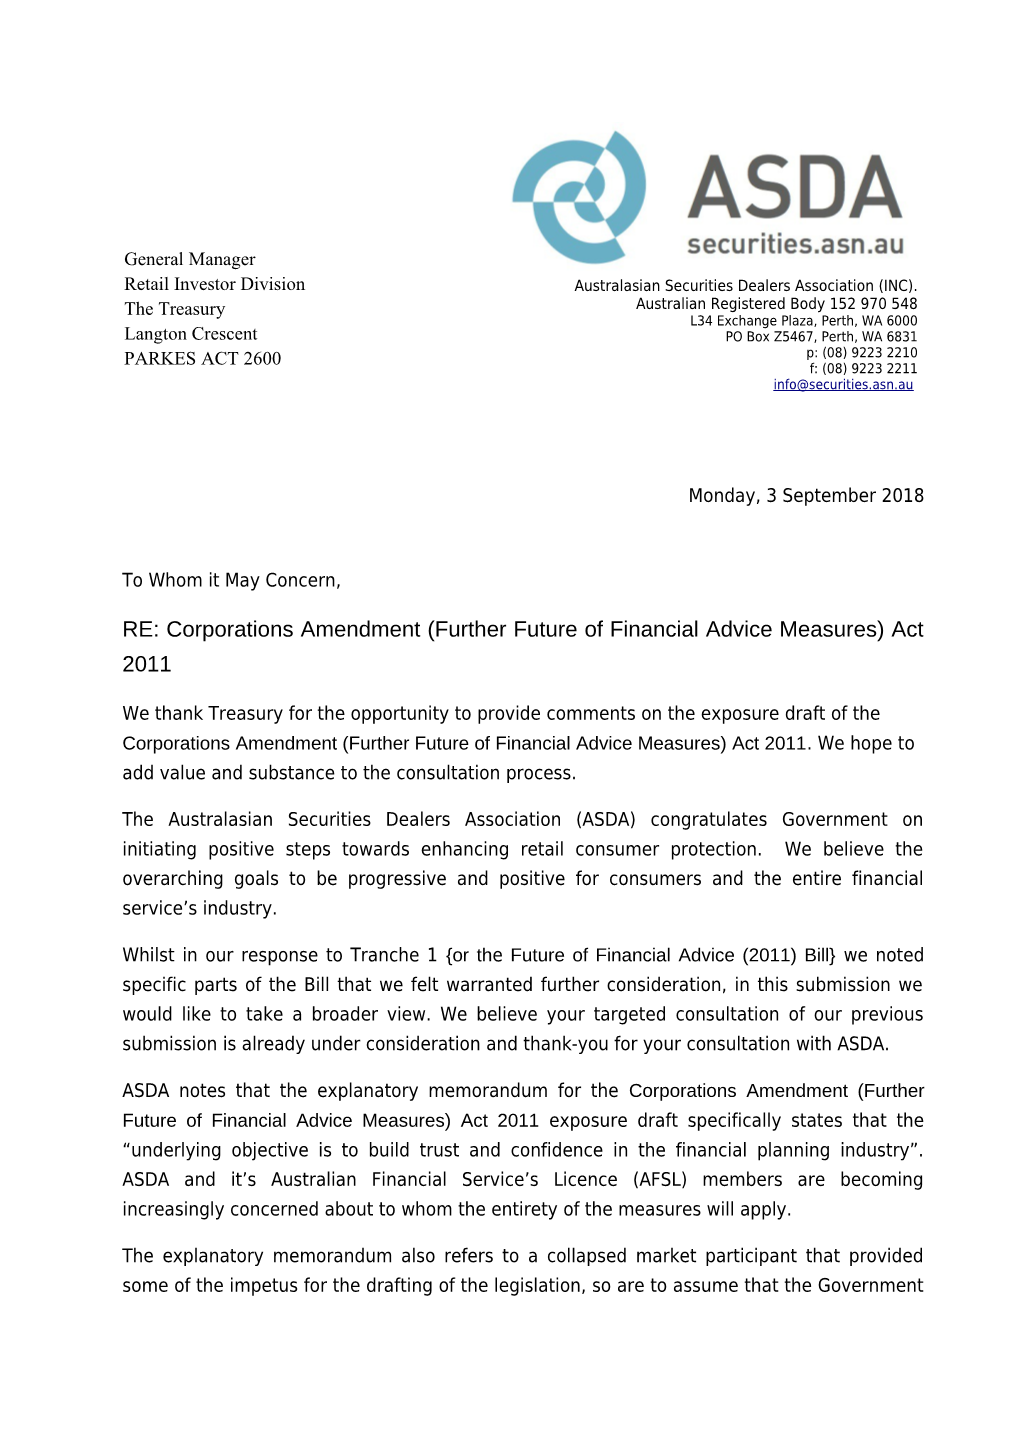 Submission to Exposure Draft - Corporations Amendment (Further Future of Financial Advice